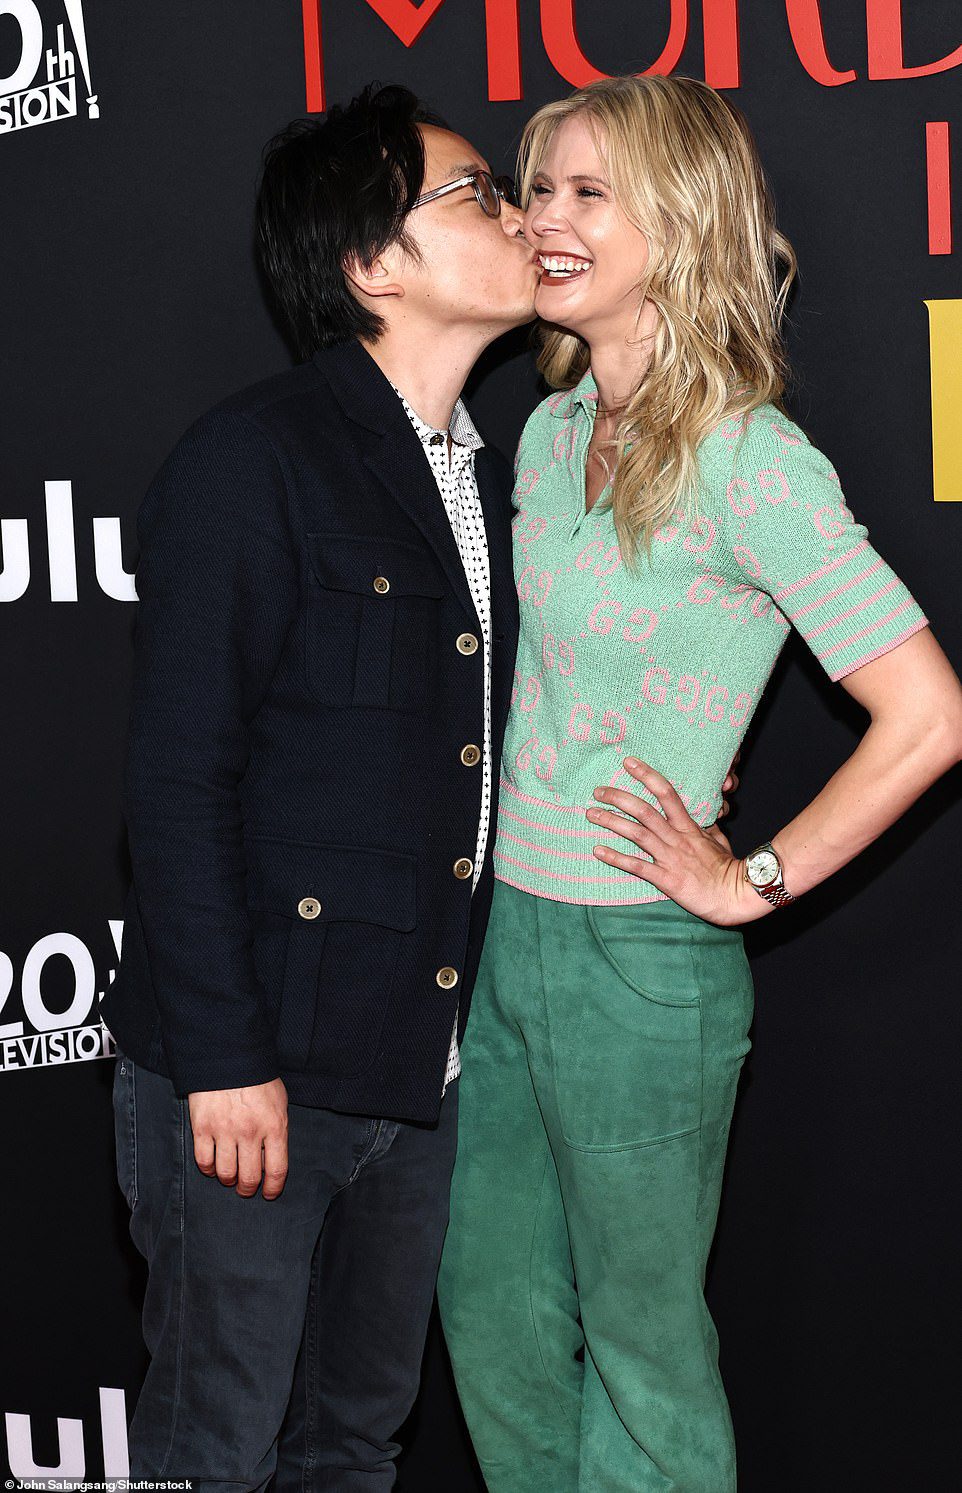 Kiss: Jimmy O. Yang gives his girlfriend Bri Kimmel a kiss at the 'Only Murders in the Building' premiere